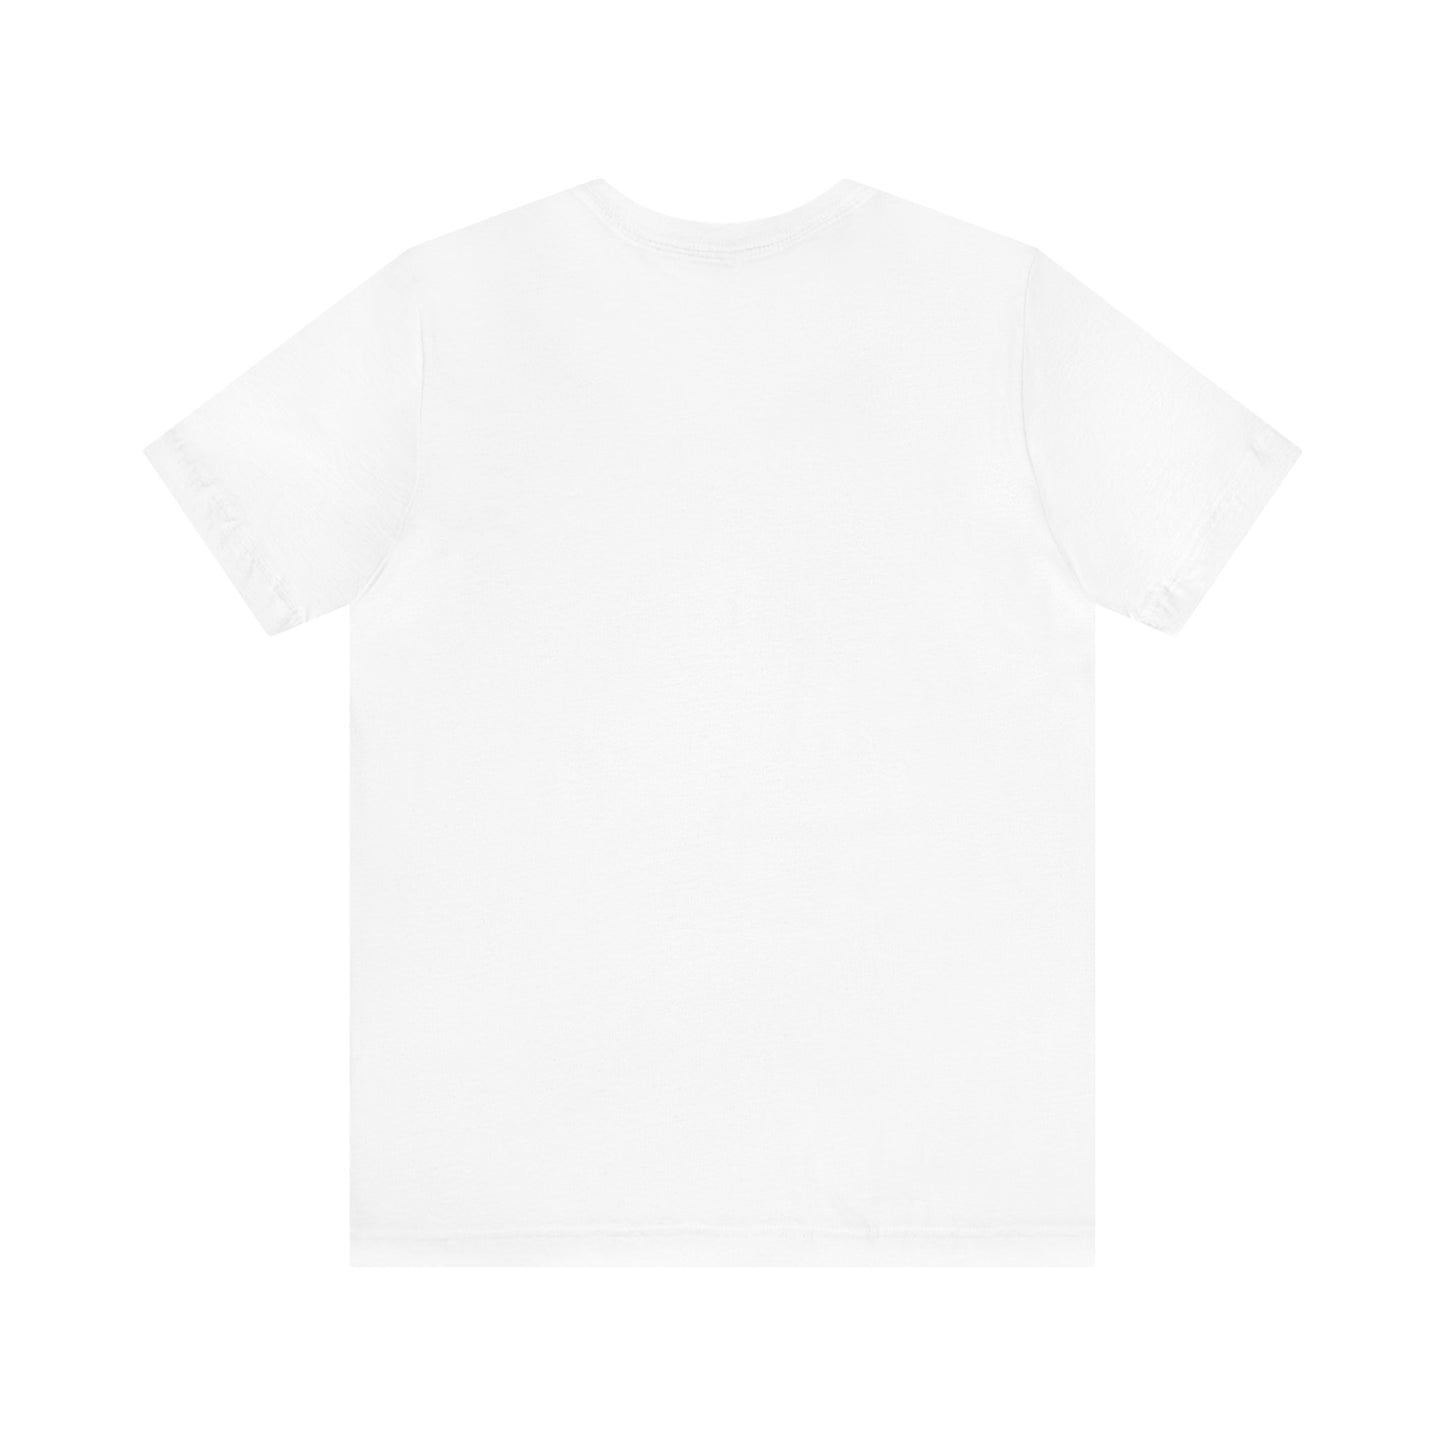 S&S All Saints Have Scars Cracked Tee